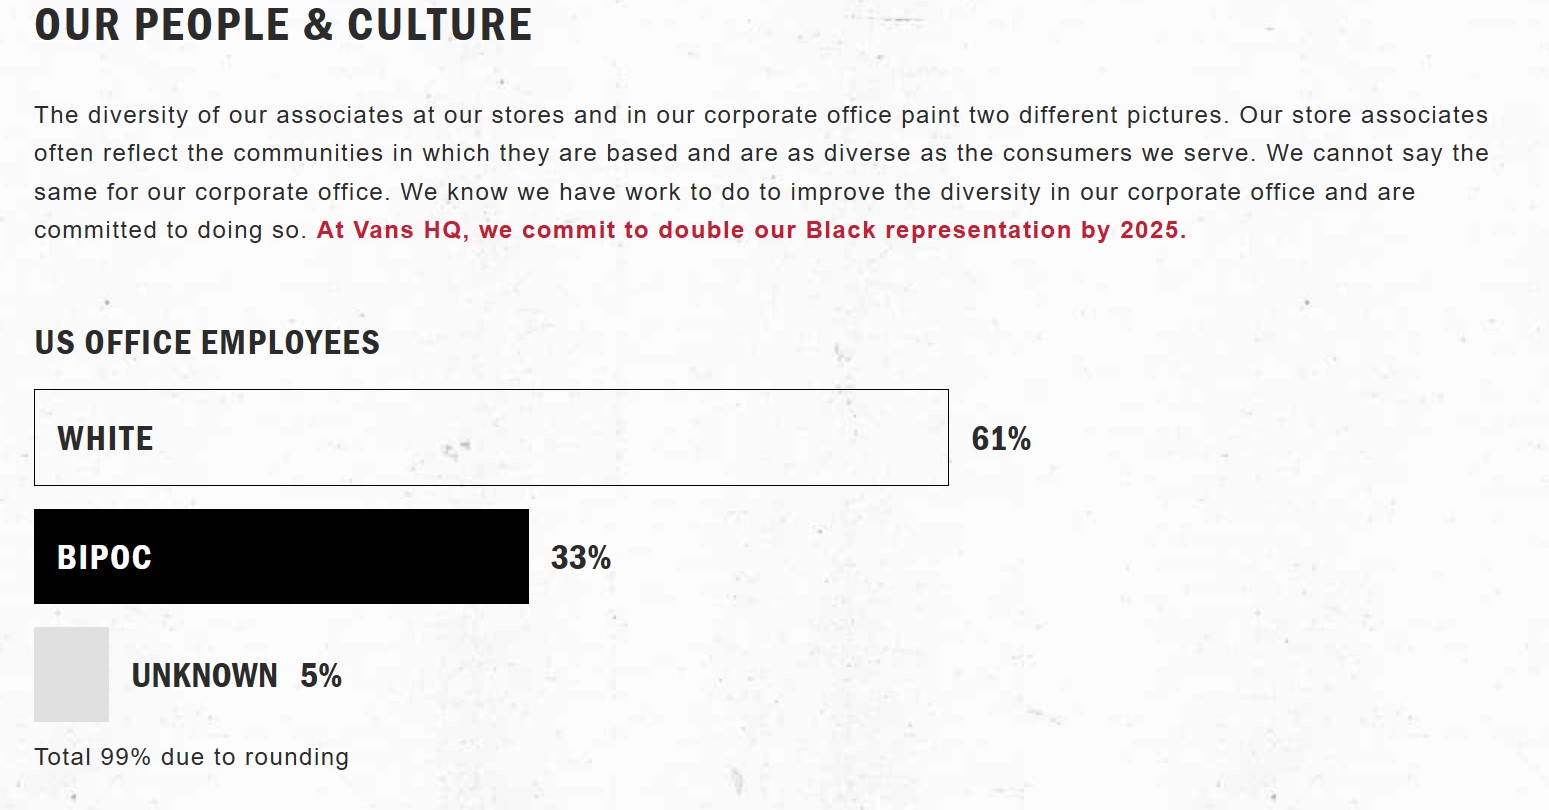 A screenshot of Vans' US Office Employee distribution according to race